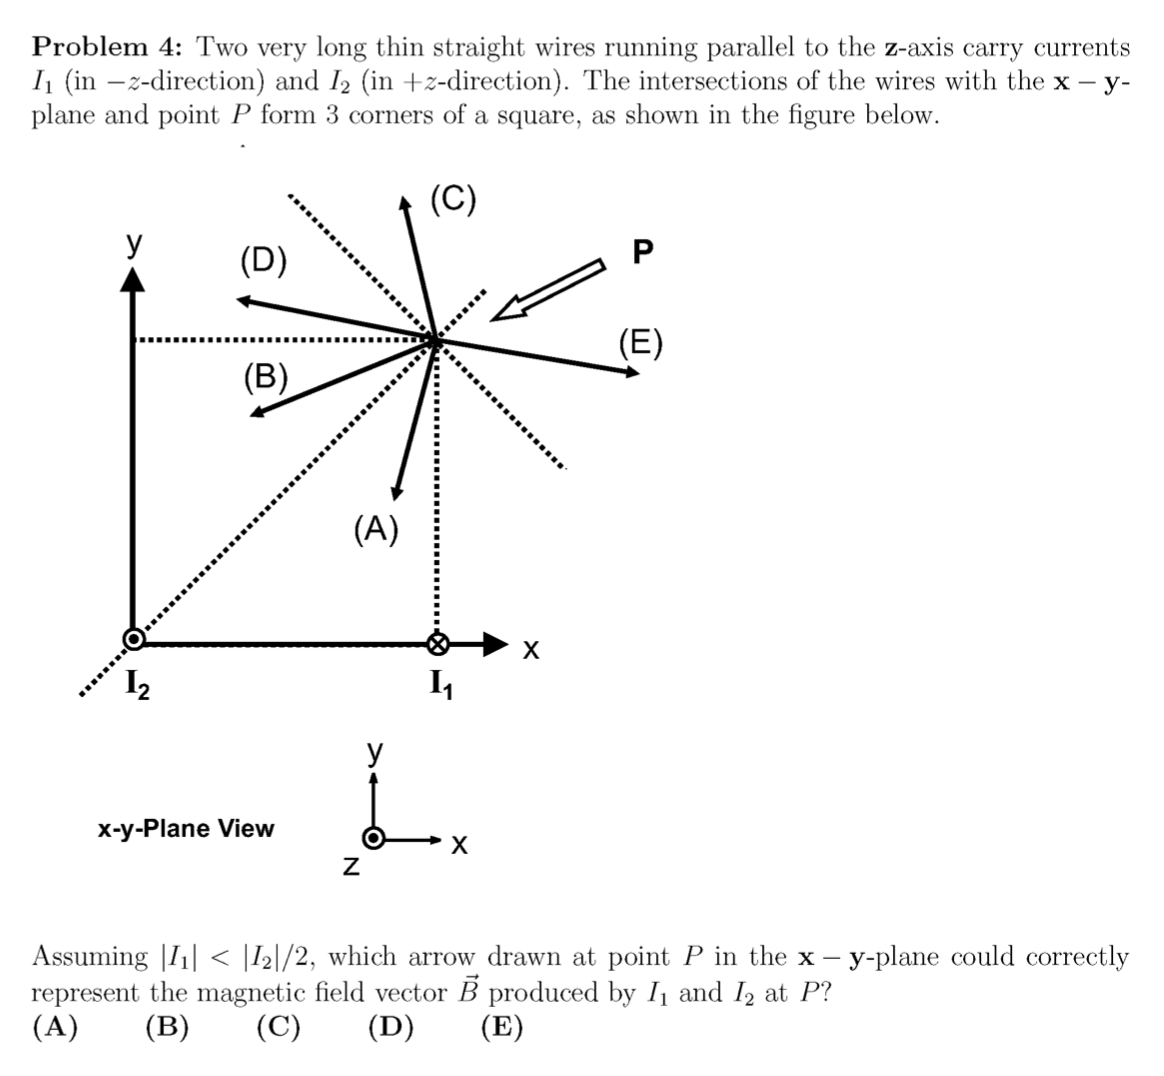 Problem 4: Two very long thin straight wires running parallel to the z-axis carry currents
I (in –z-direction) and I2 (in +z-direction). The intersections of the wires with the x – y-
plane and point P form 3 corners of a square, as shown in the figure below.
(C)
У
(D)
(E)
(B)
(A)
I,
У
x-y-Plane View
х
Assuming |I1| < |I2|/2, which arrow drawn at point P in the x – y-plane could correctly
represent the magnetic field vector B produced by I1 and I2 at P?
(A)
(B)
(C)
(D)
(E)
